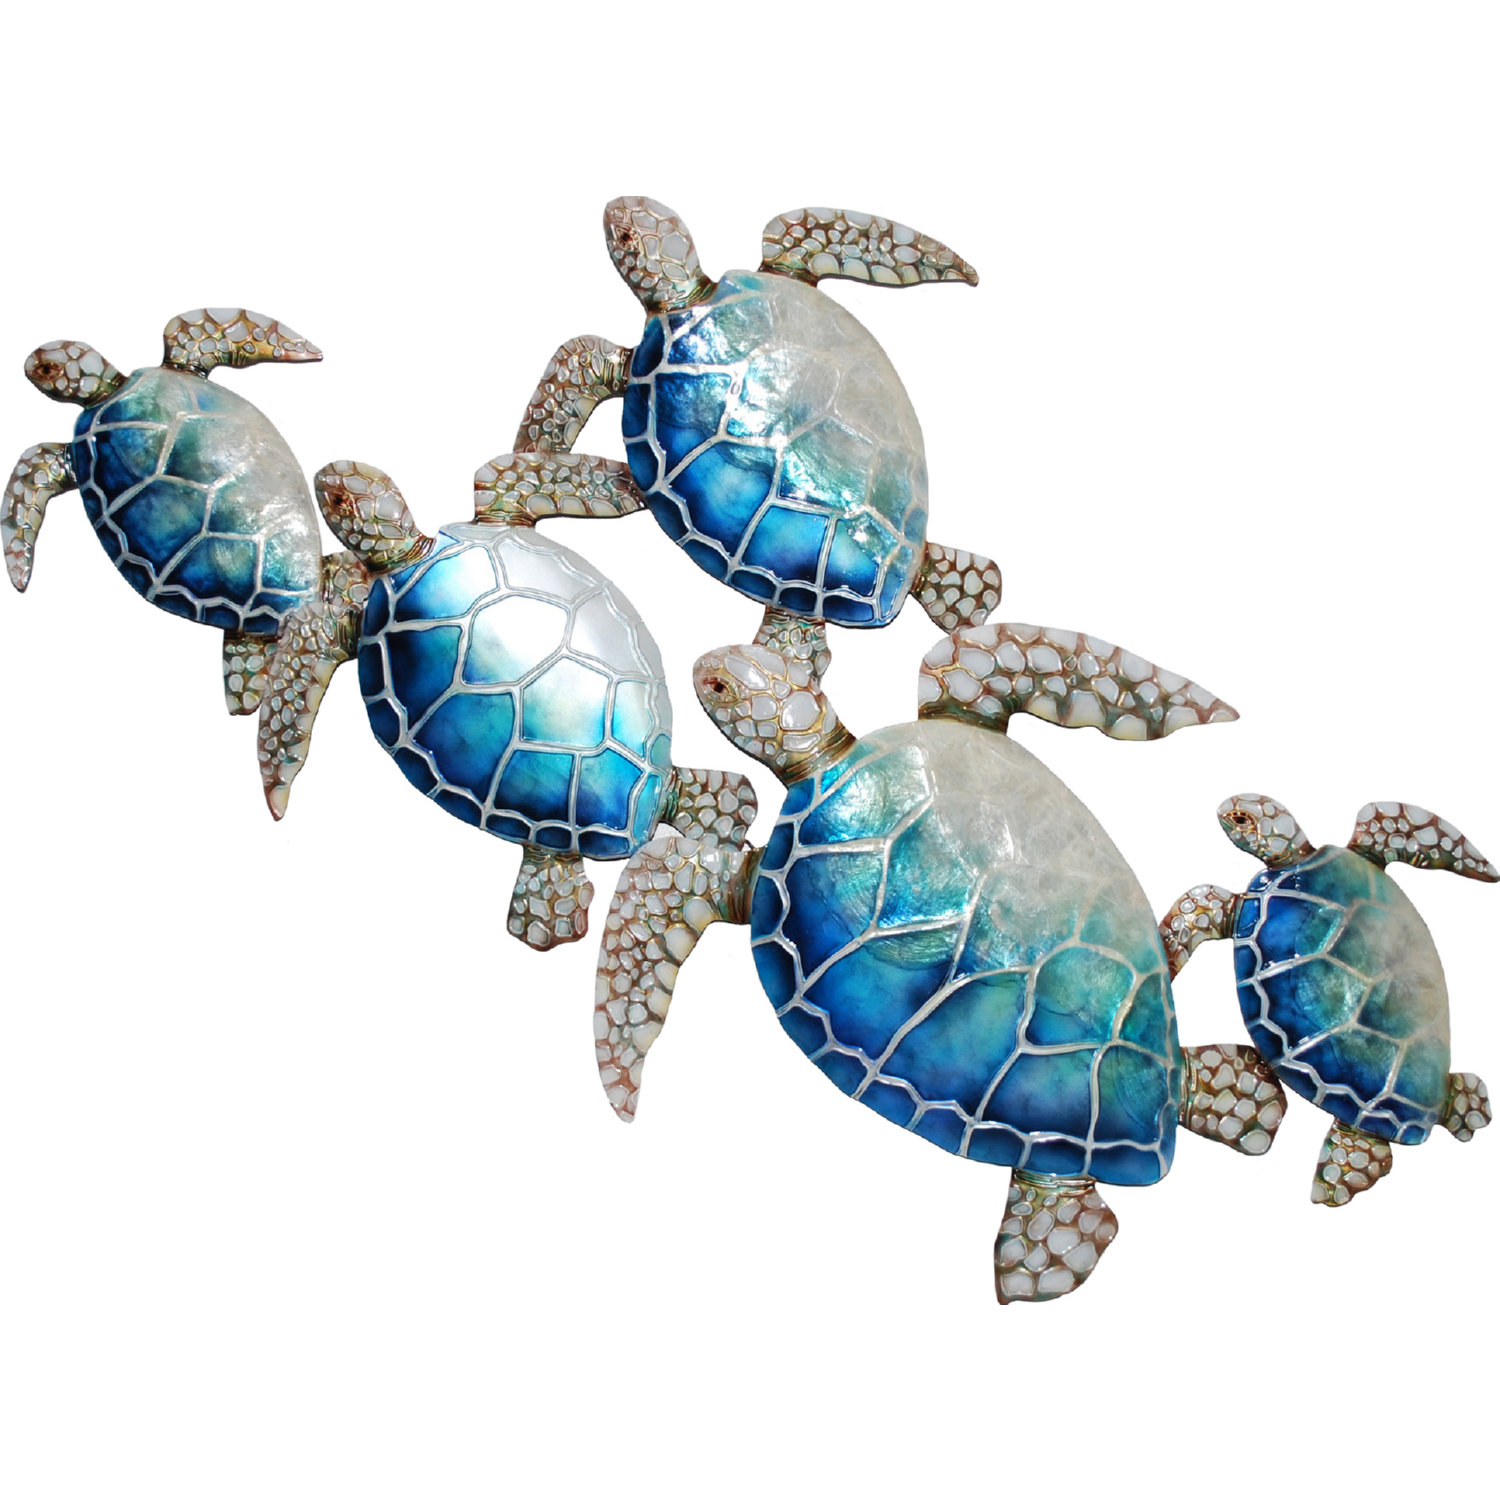 Eangee Sea Turtle Wall Decor Group of Five